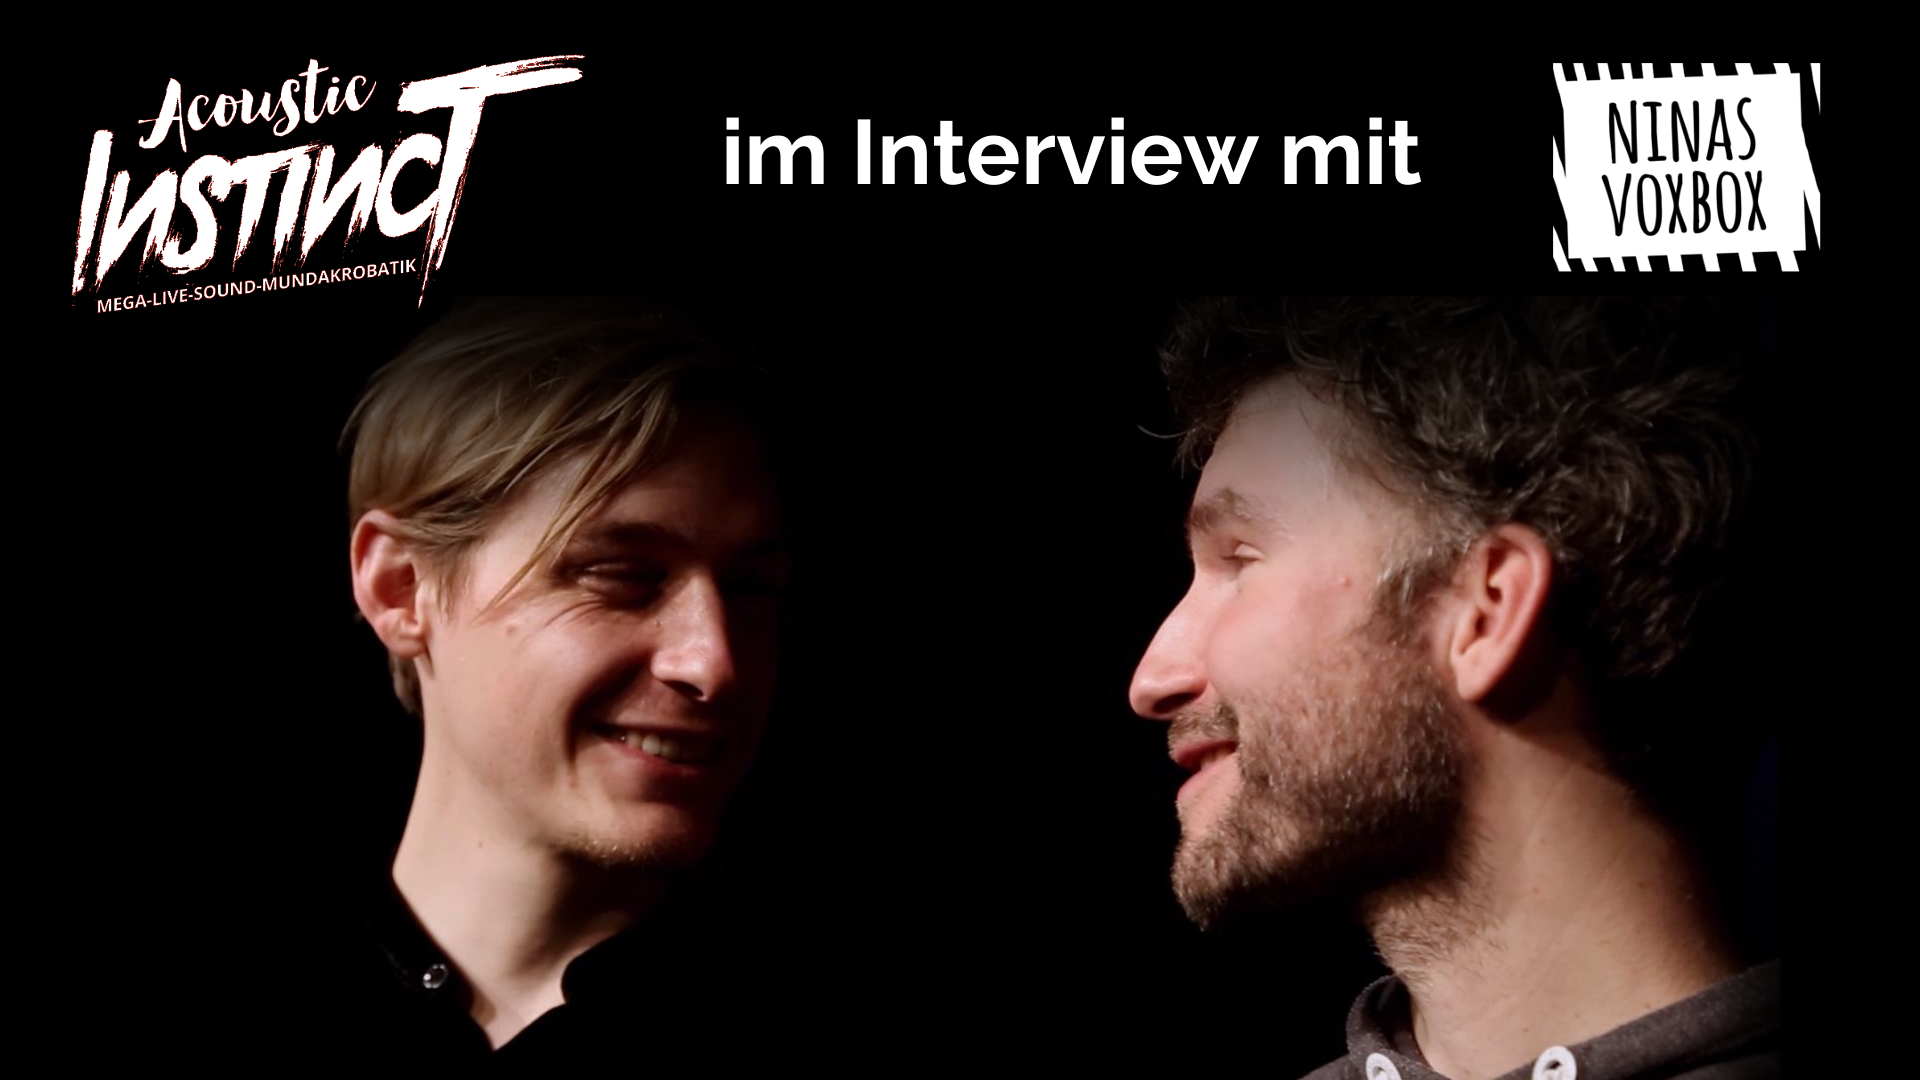 You are currently viewing Acoustic Instinct im Interview